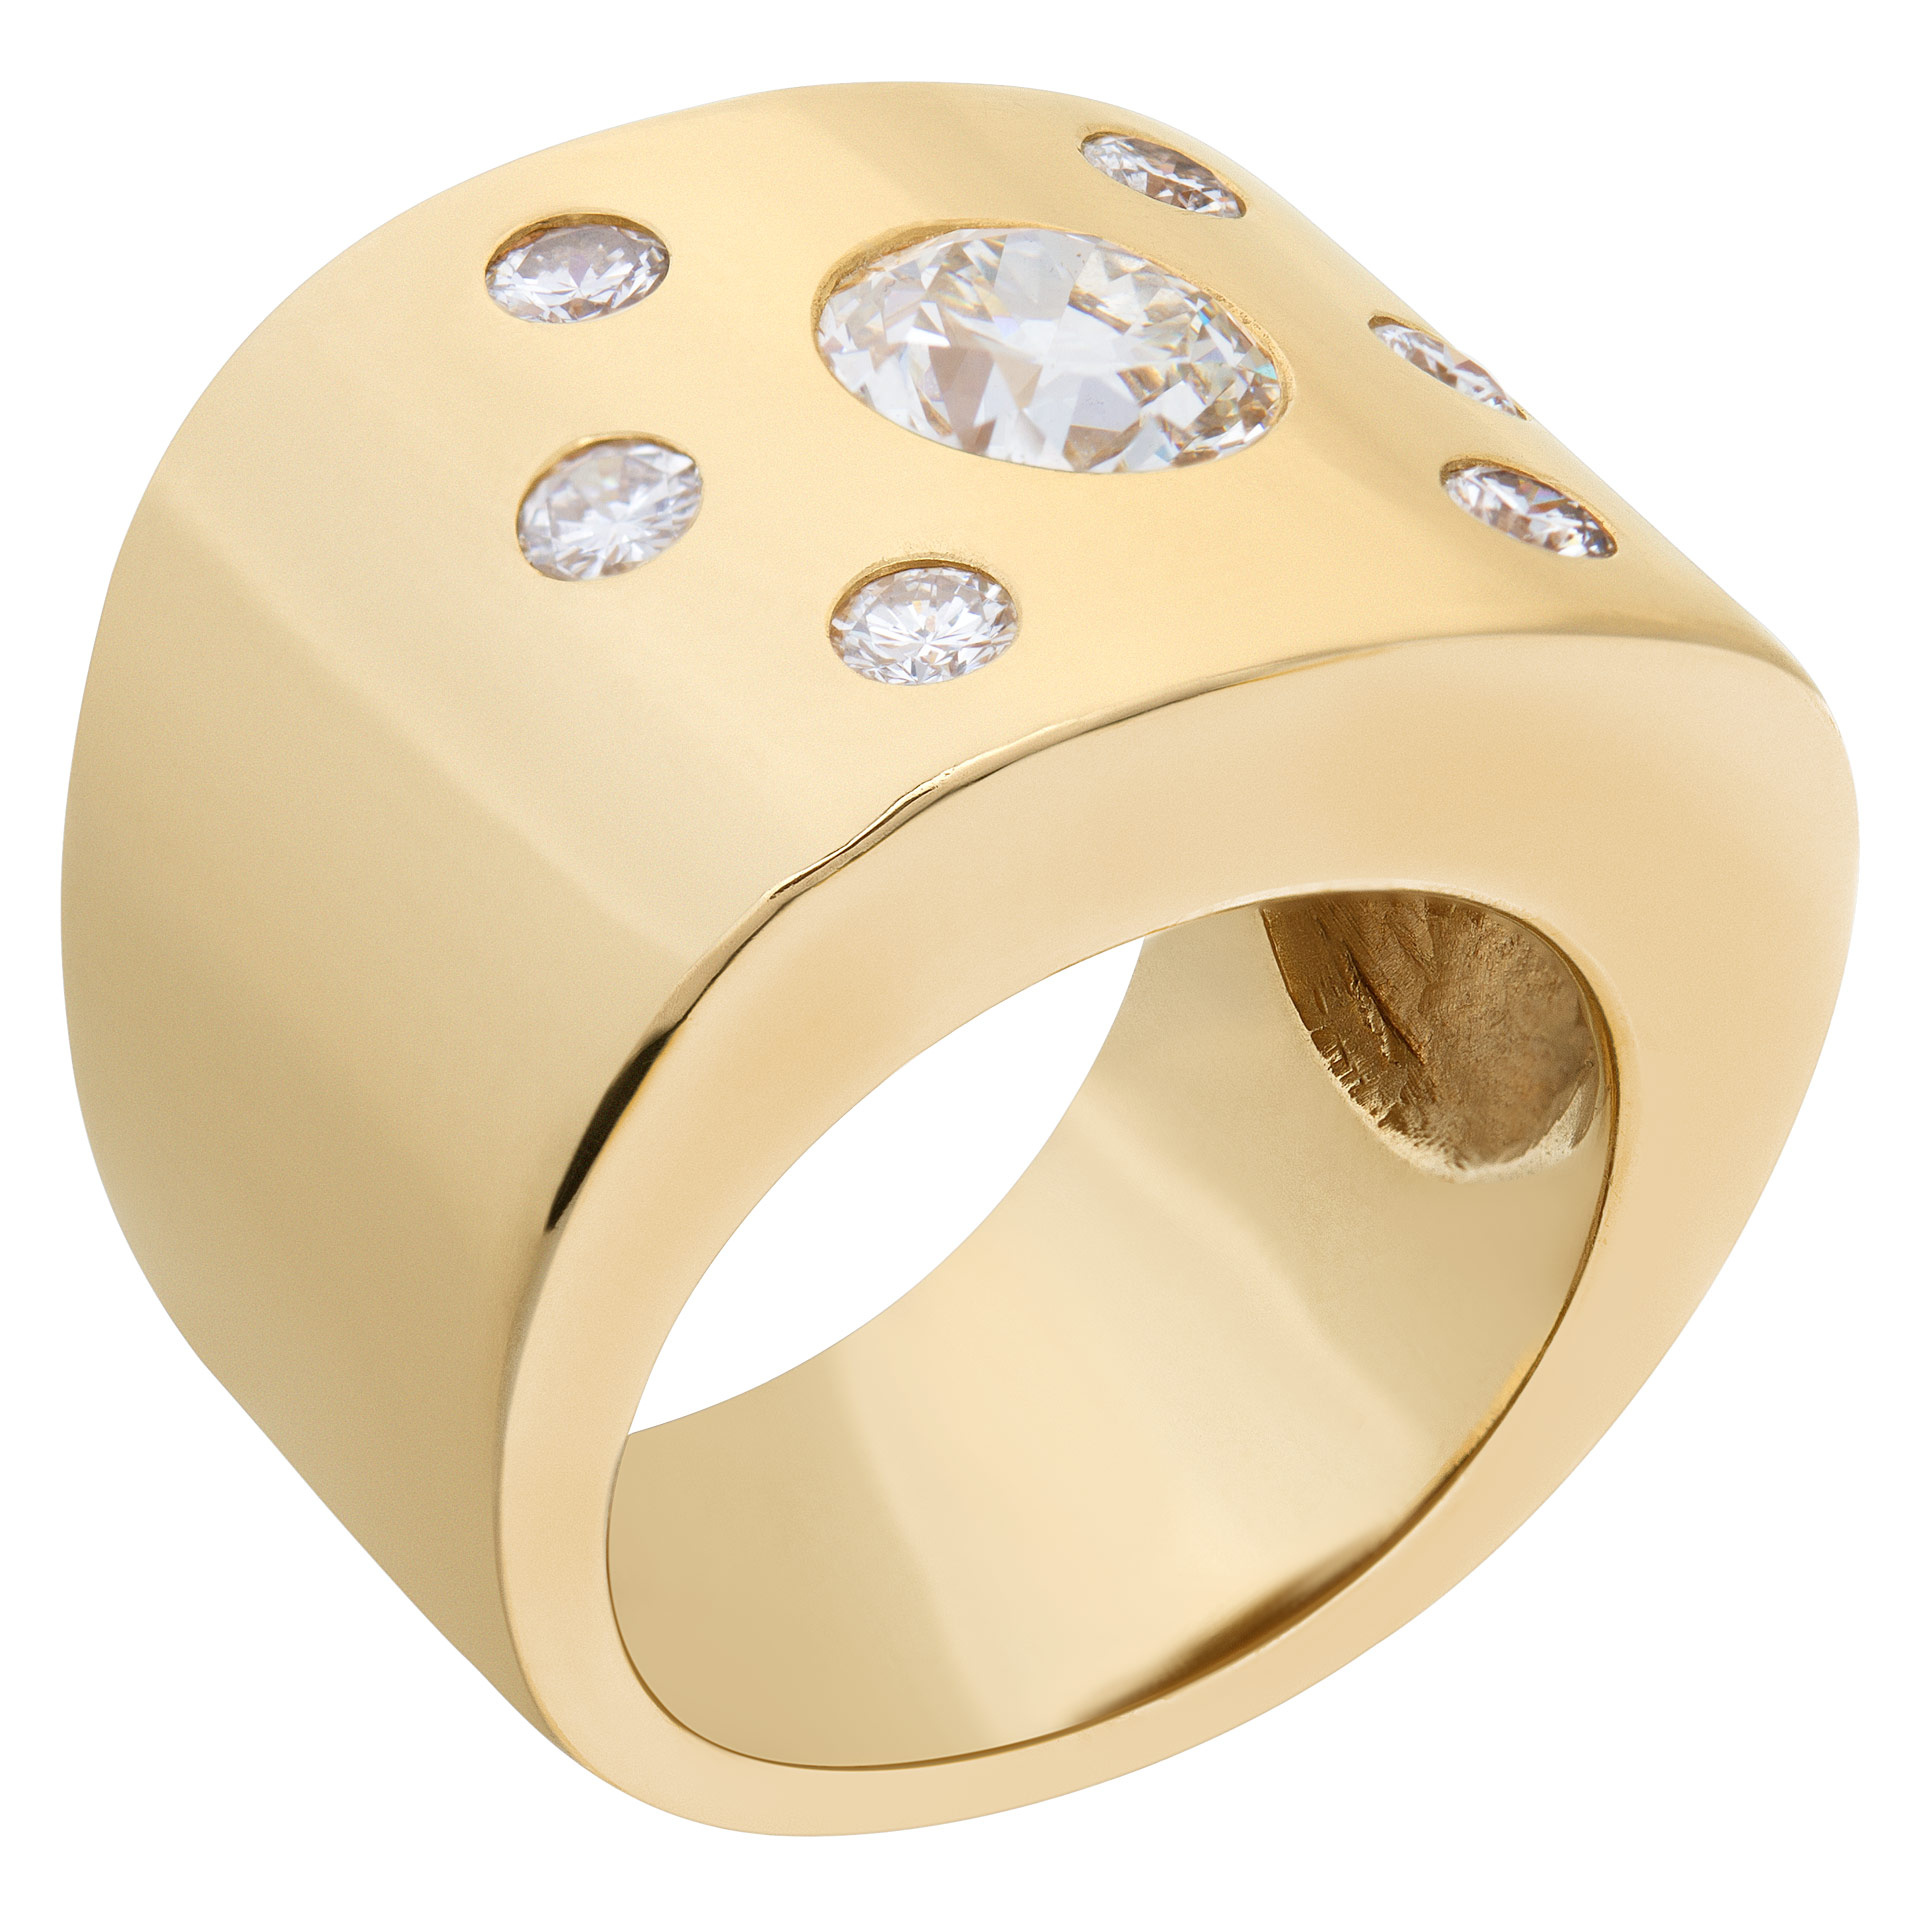 Wide diamonds ring in solid 14k yellow gold. Round brilliant cut diamonds total approx. weight: 1.42 carat,` image 2